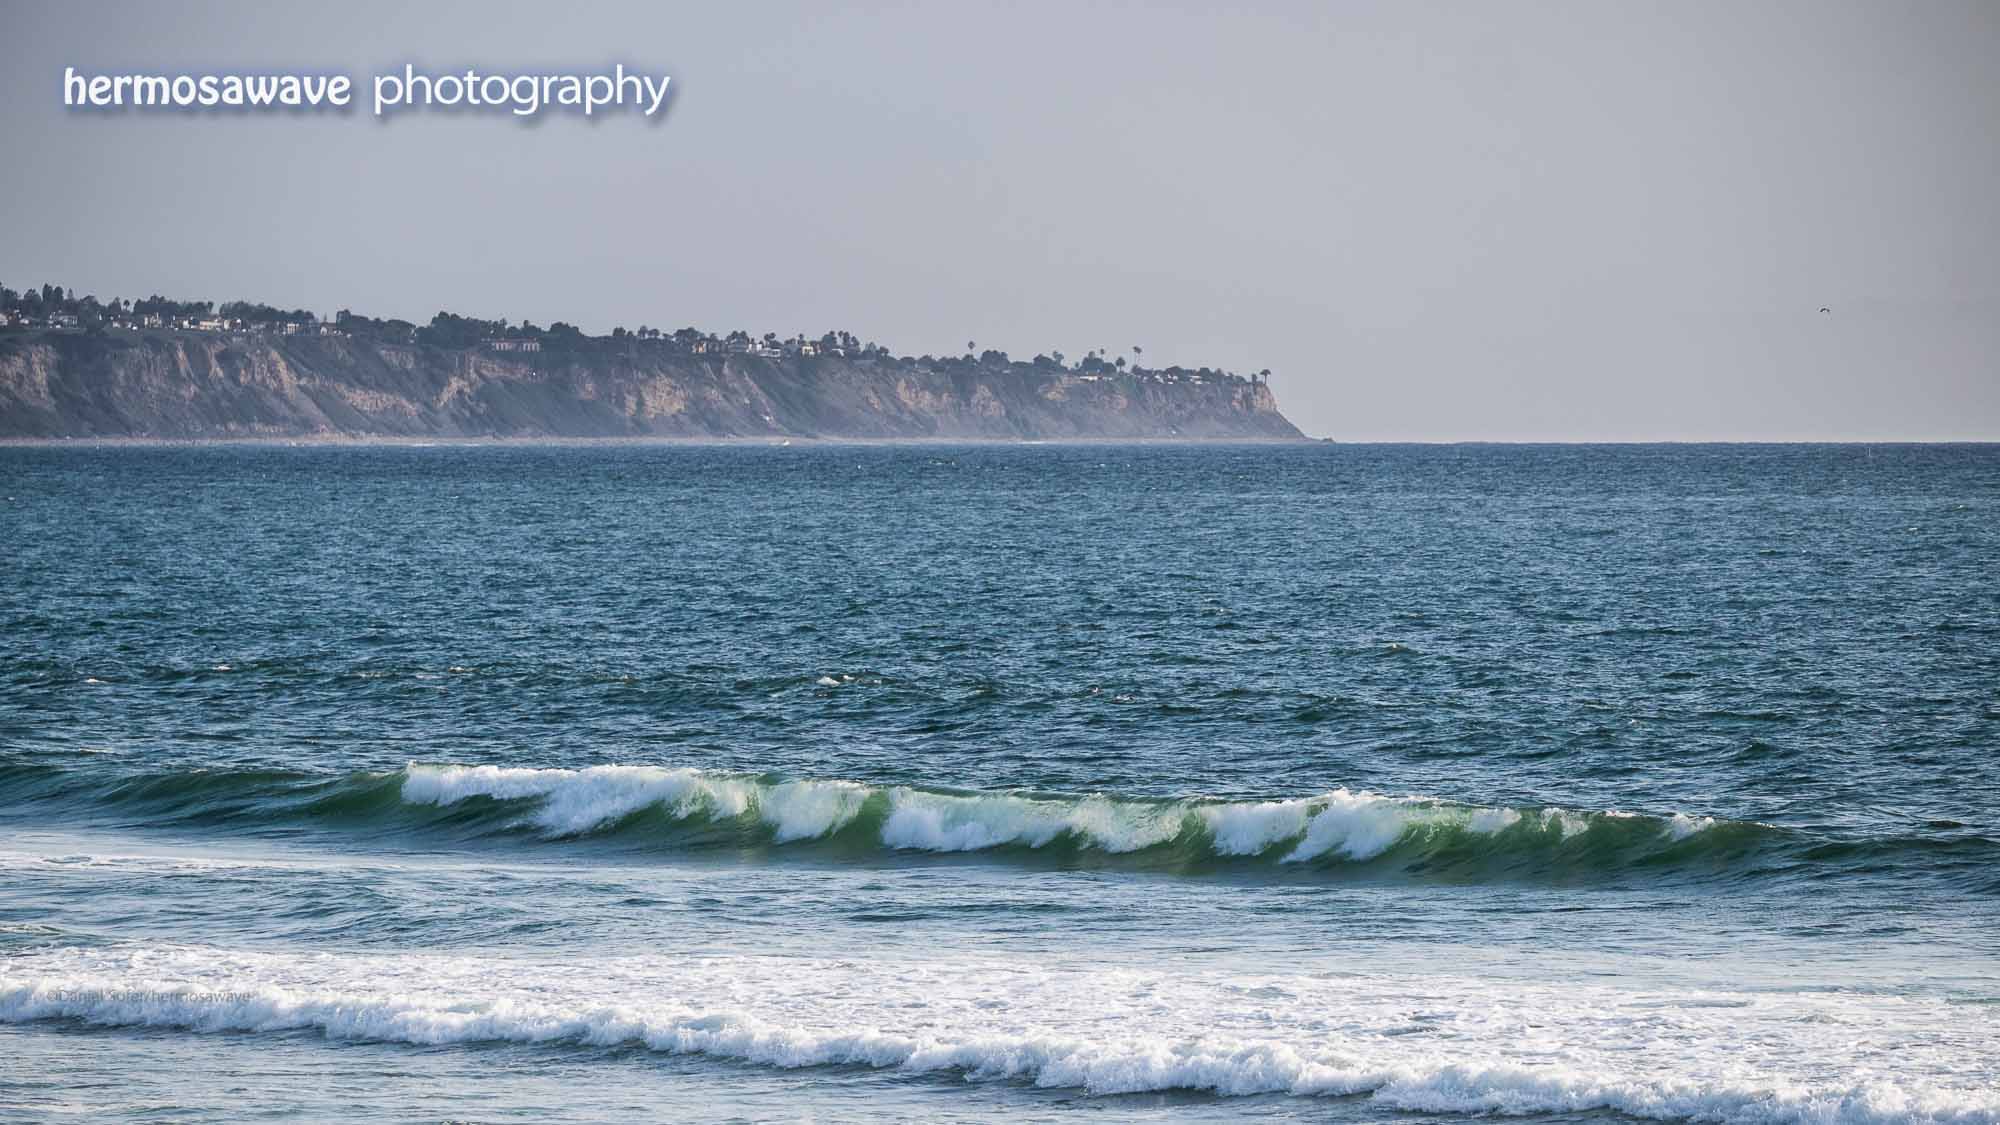 Waves and Palos Verdes